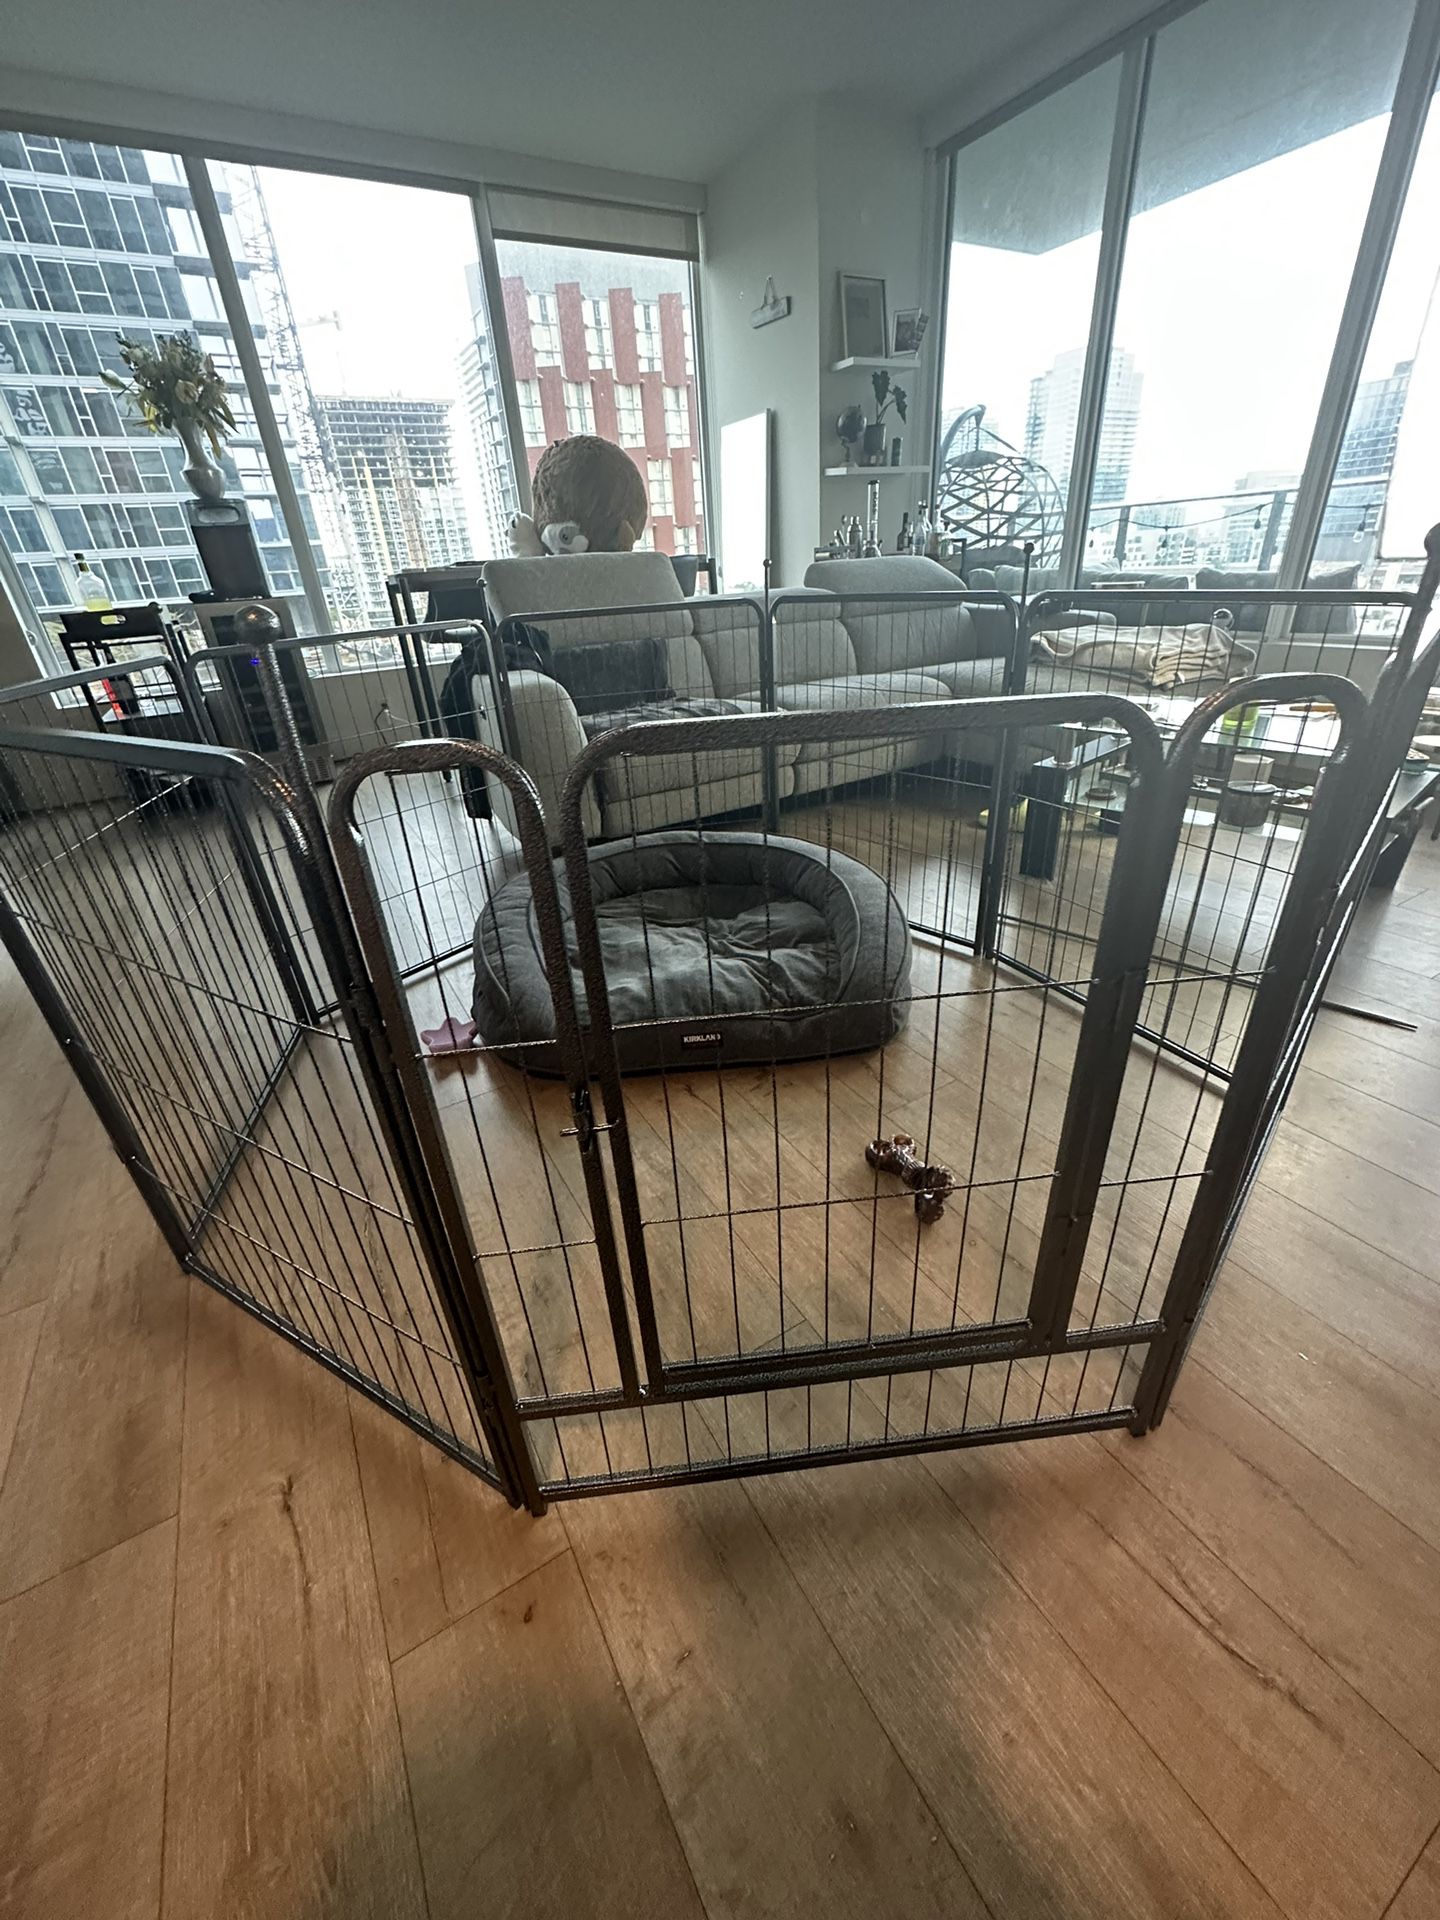 Brand New Dog Play Crate 